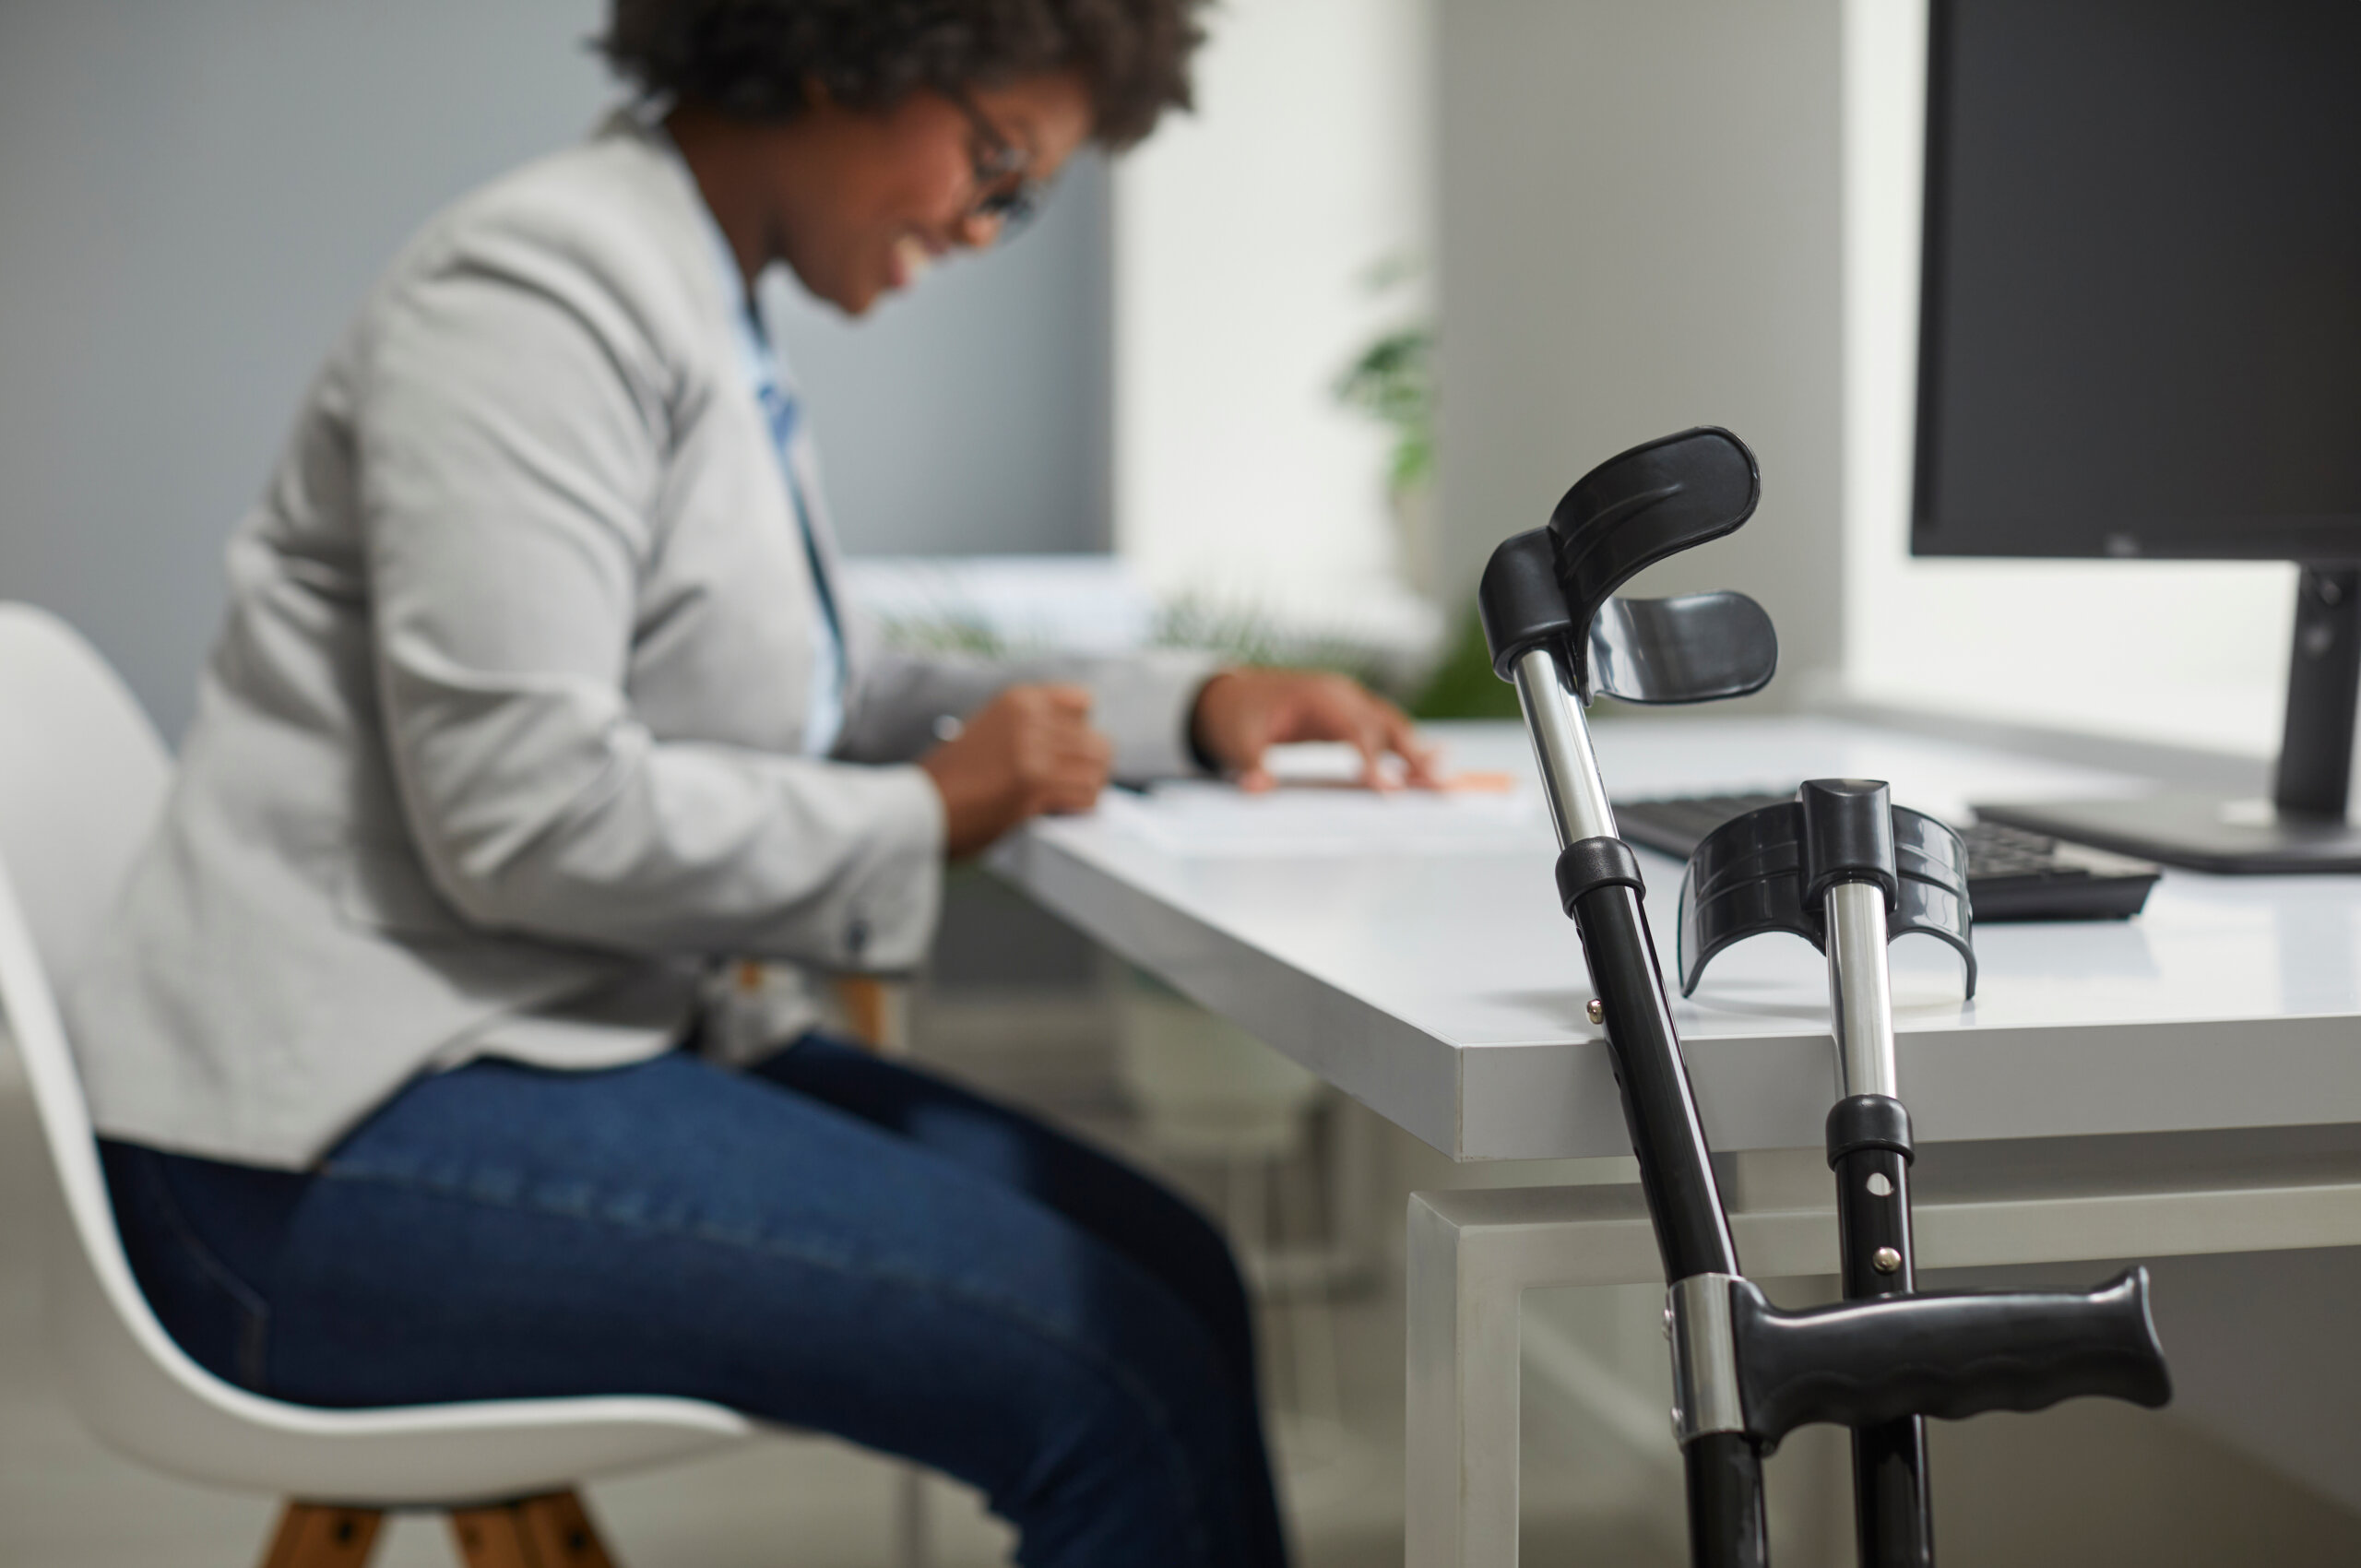 Disabled employee working in office. Orthopedic elbow crutches leaning on desk, with happy disabled African American woman working on computer in background. Working with disability concept